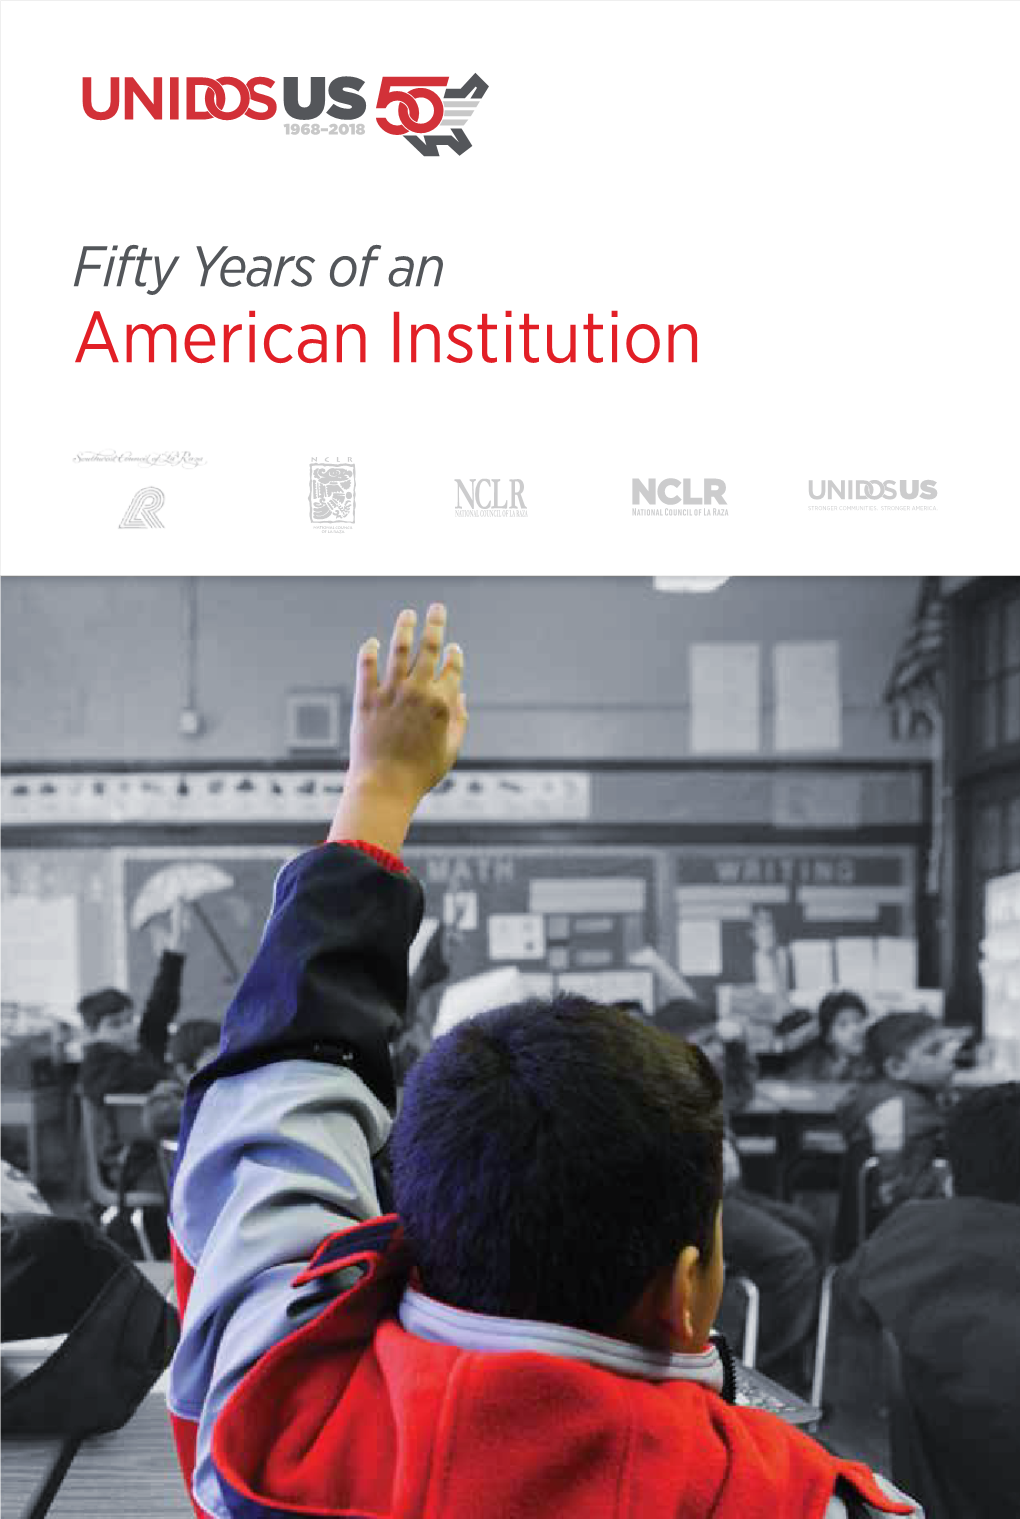 American Institution Unidosus, Previously Known As NCLR (National Council of La Raza), Is the Nation’S Largest Hispanic Civil Rights and Advocacy Organization